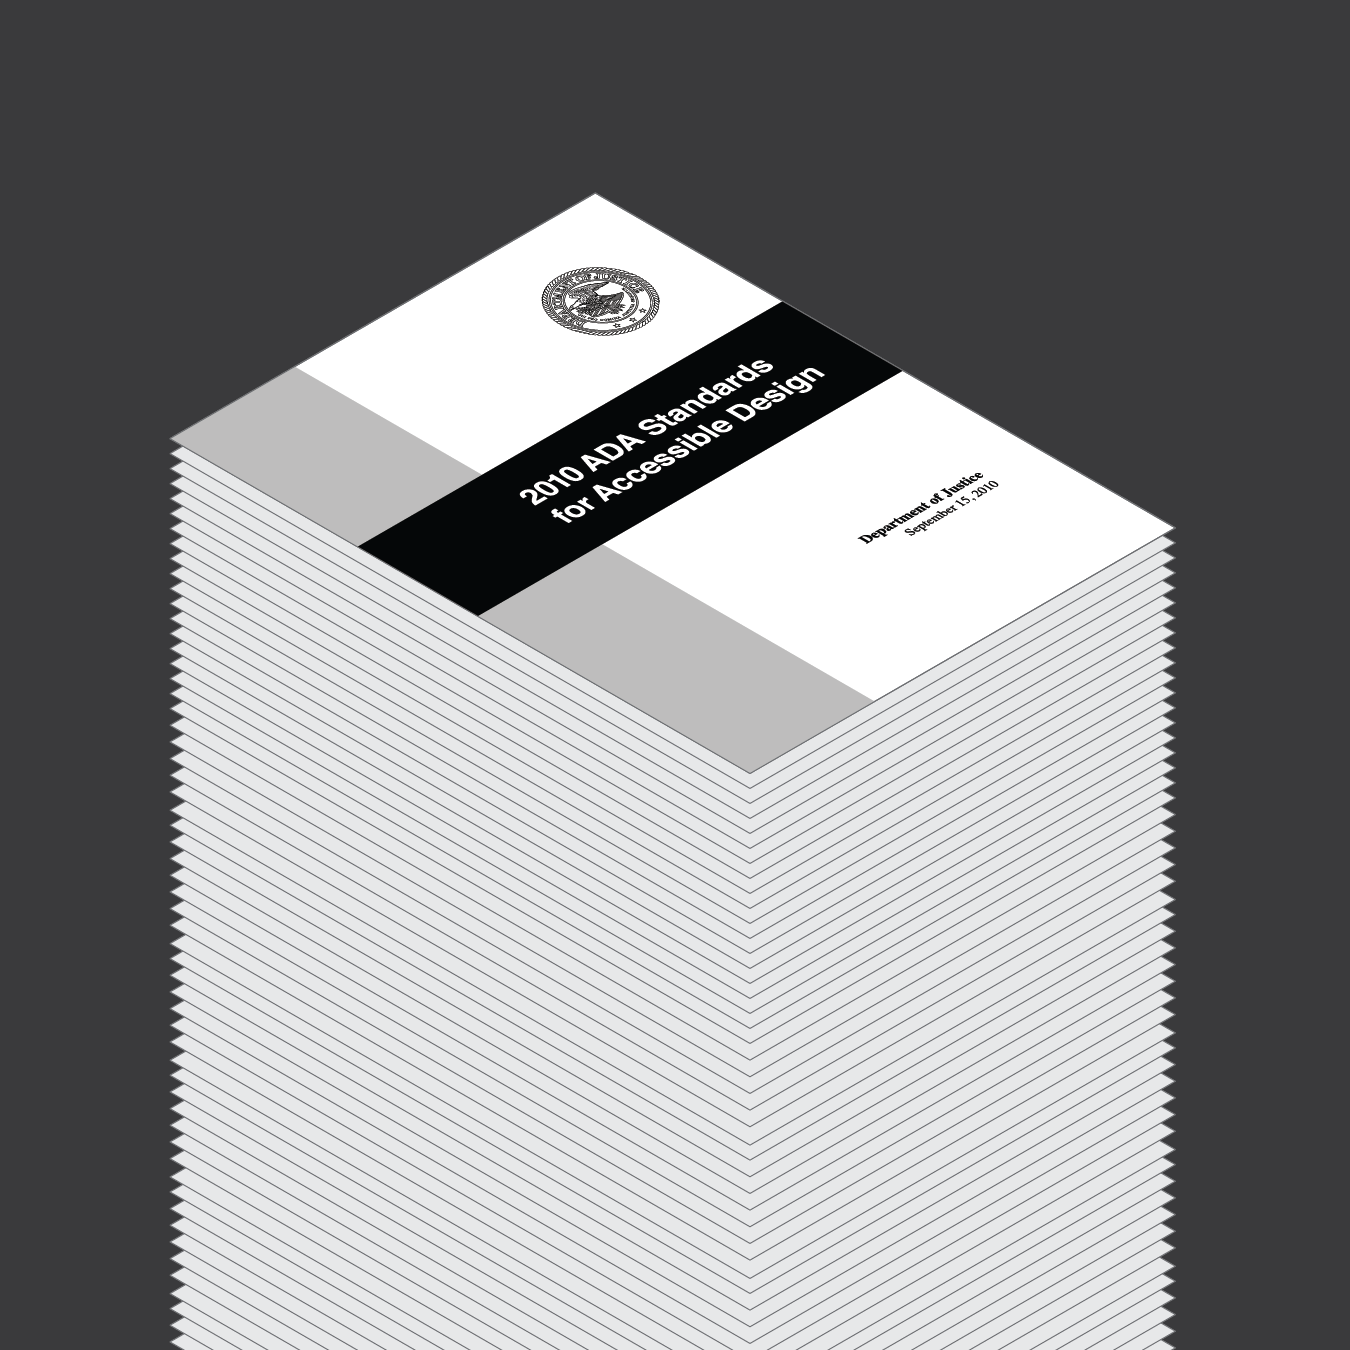 An illustration of a towering stack of papers. At top, we see the front cover for the 2010 ADA Standards for Accessible Design.